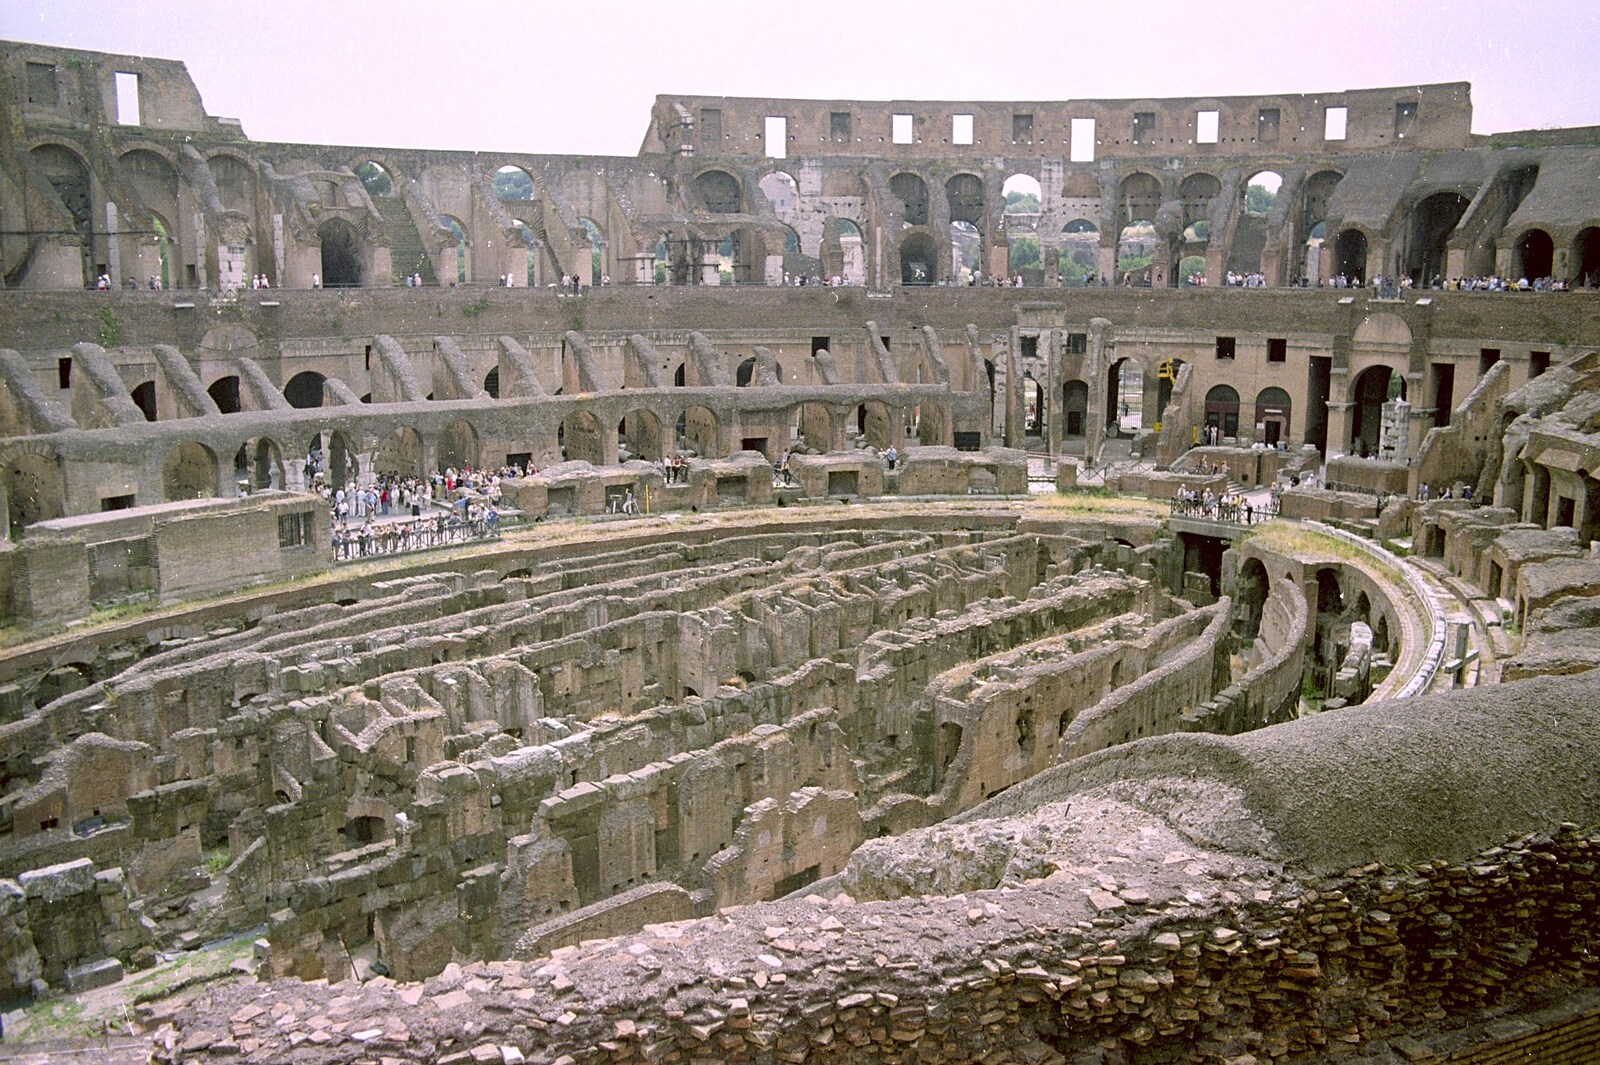 Another view inside the Colosseum from A Working Trip to Rome, Italy - 10th September 1999